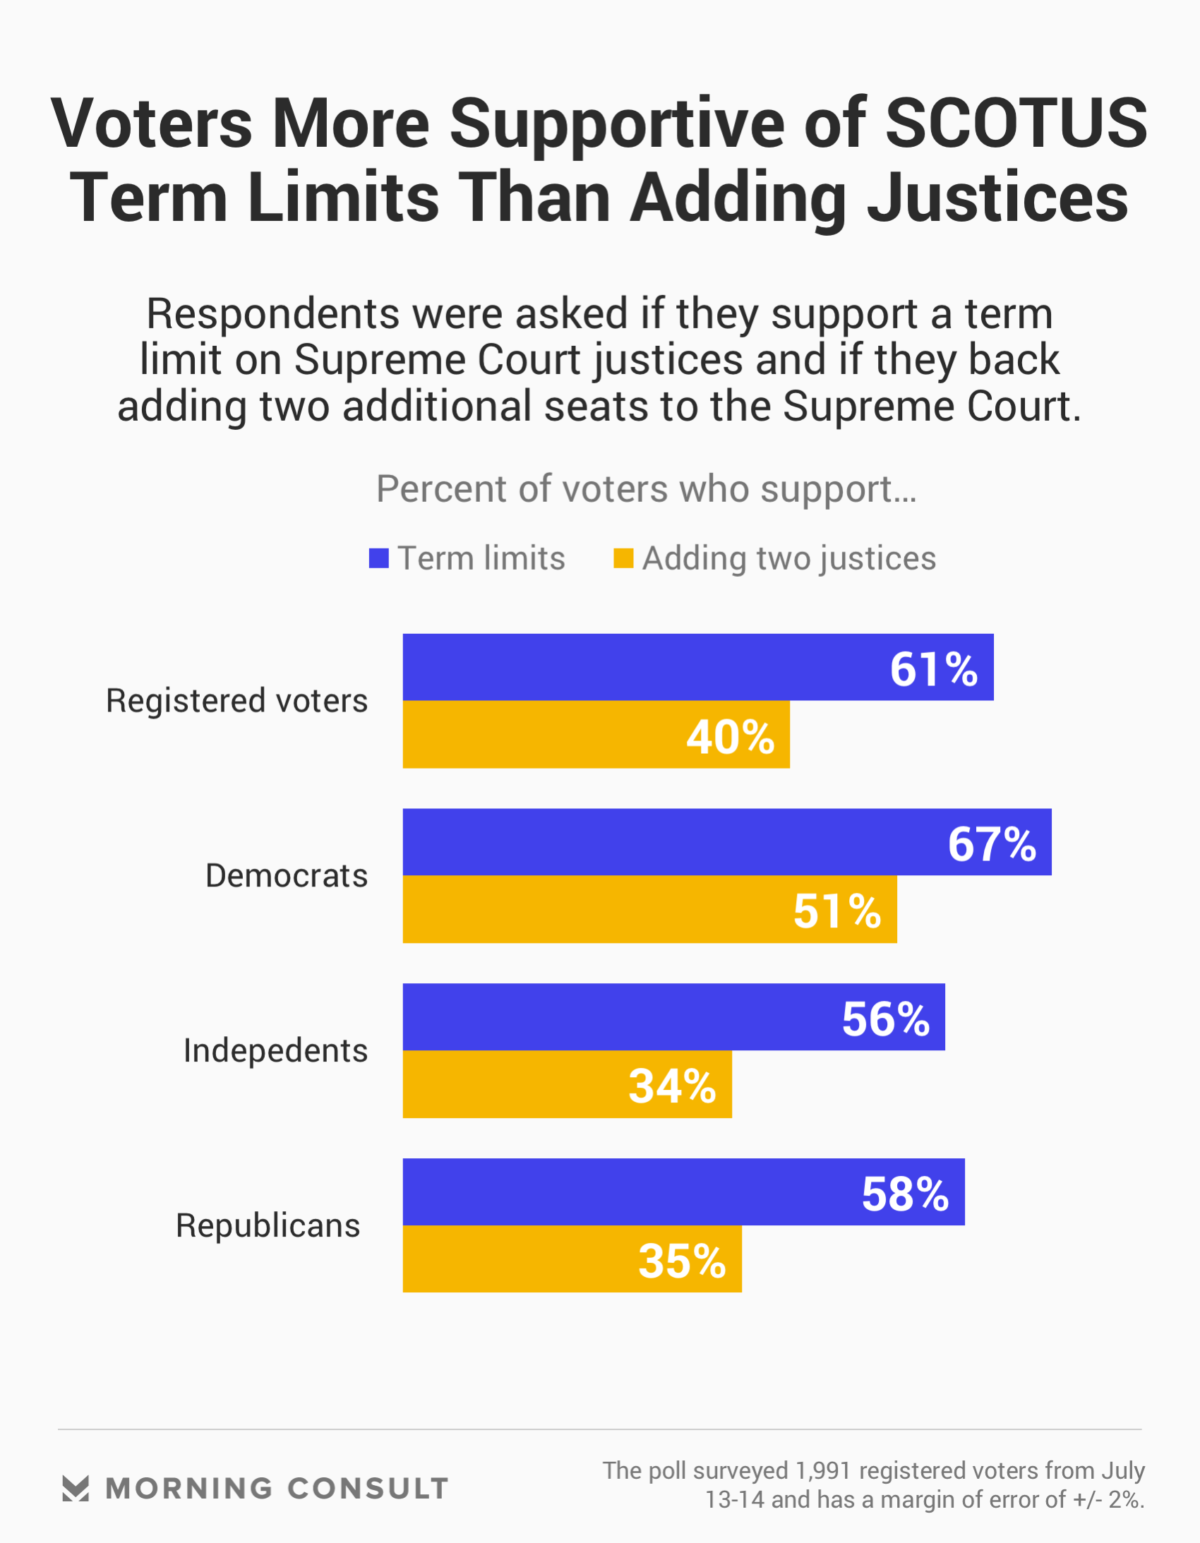 Majority of Voters Back Term Limits for Supreme Court Justices